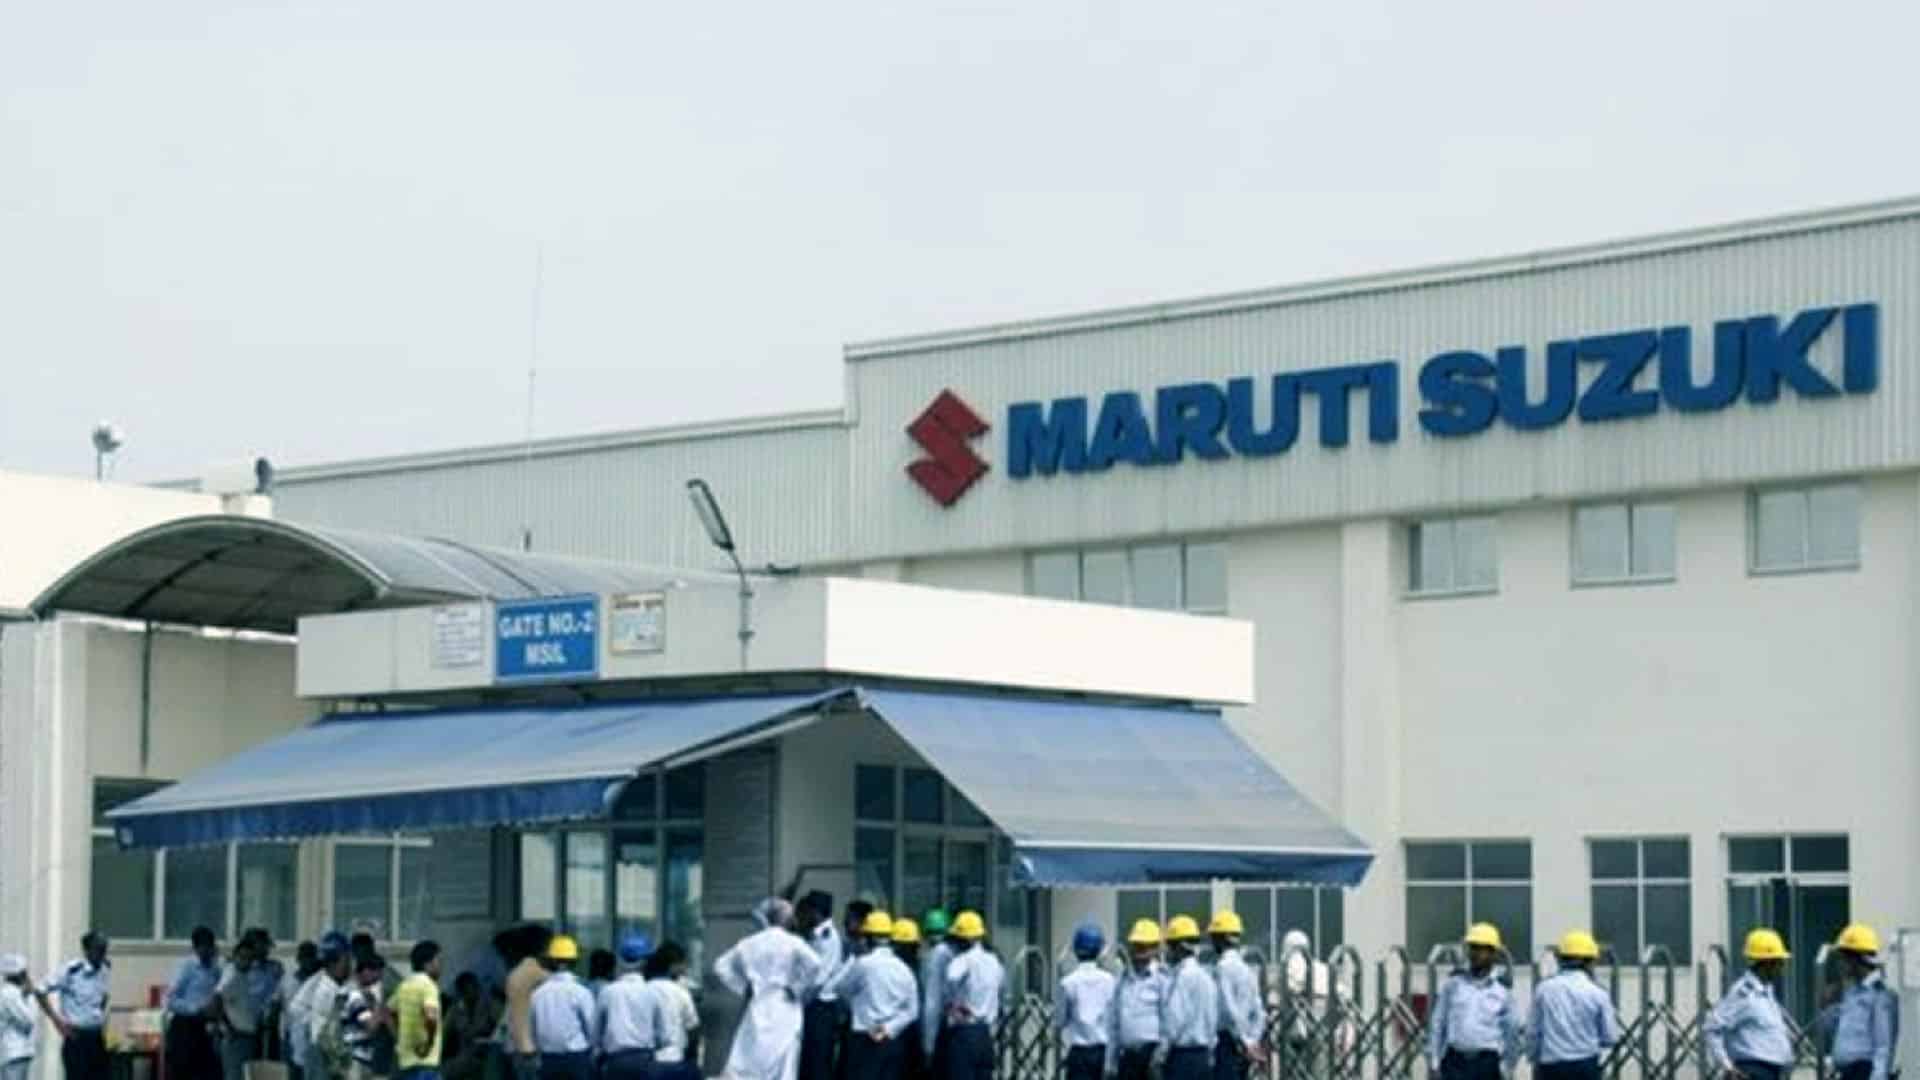 Maruti launches mobility challenge for startups to explore new tech